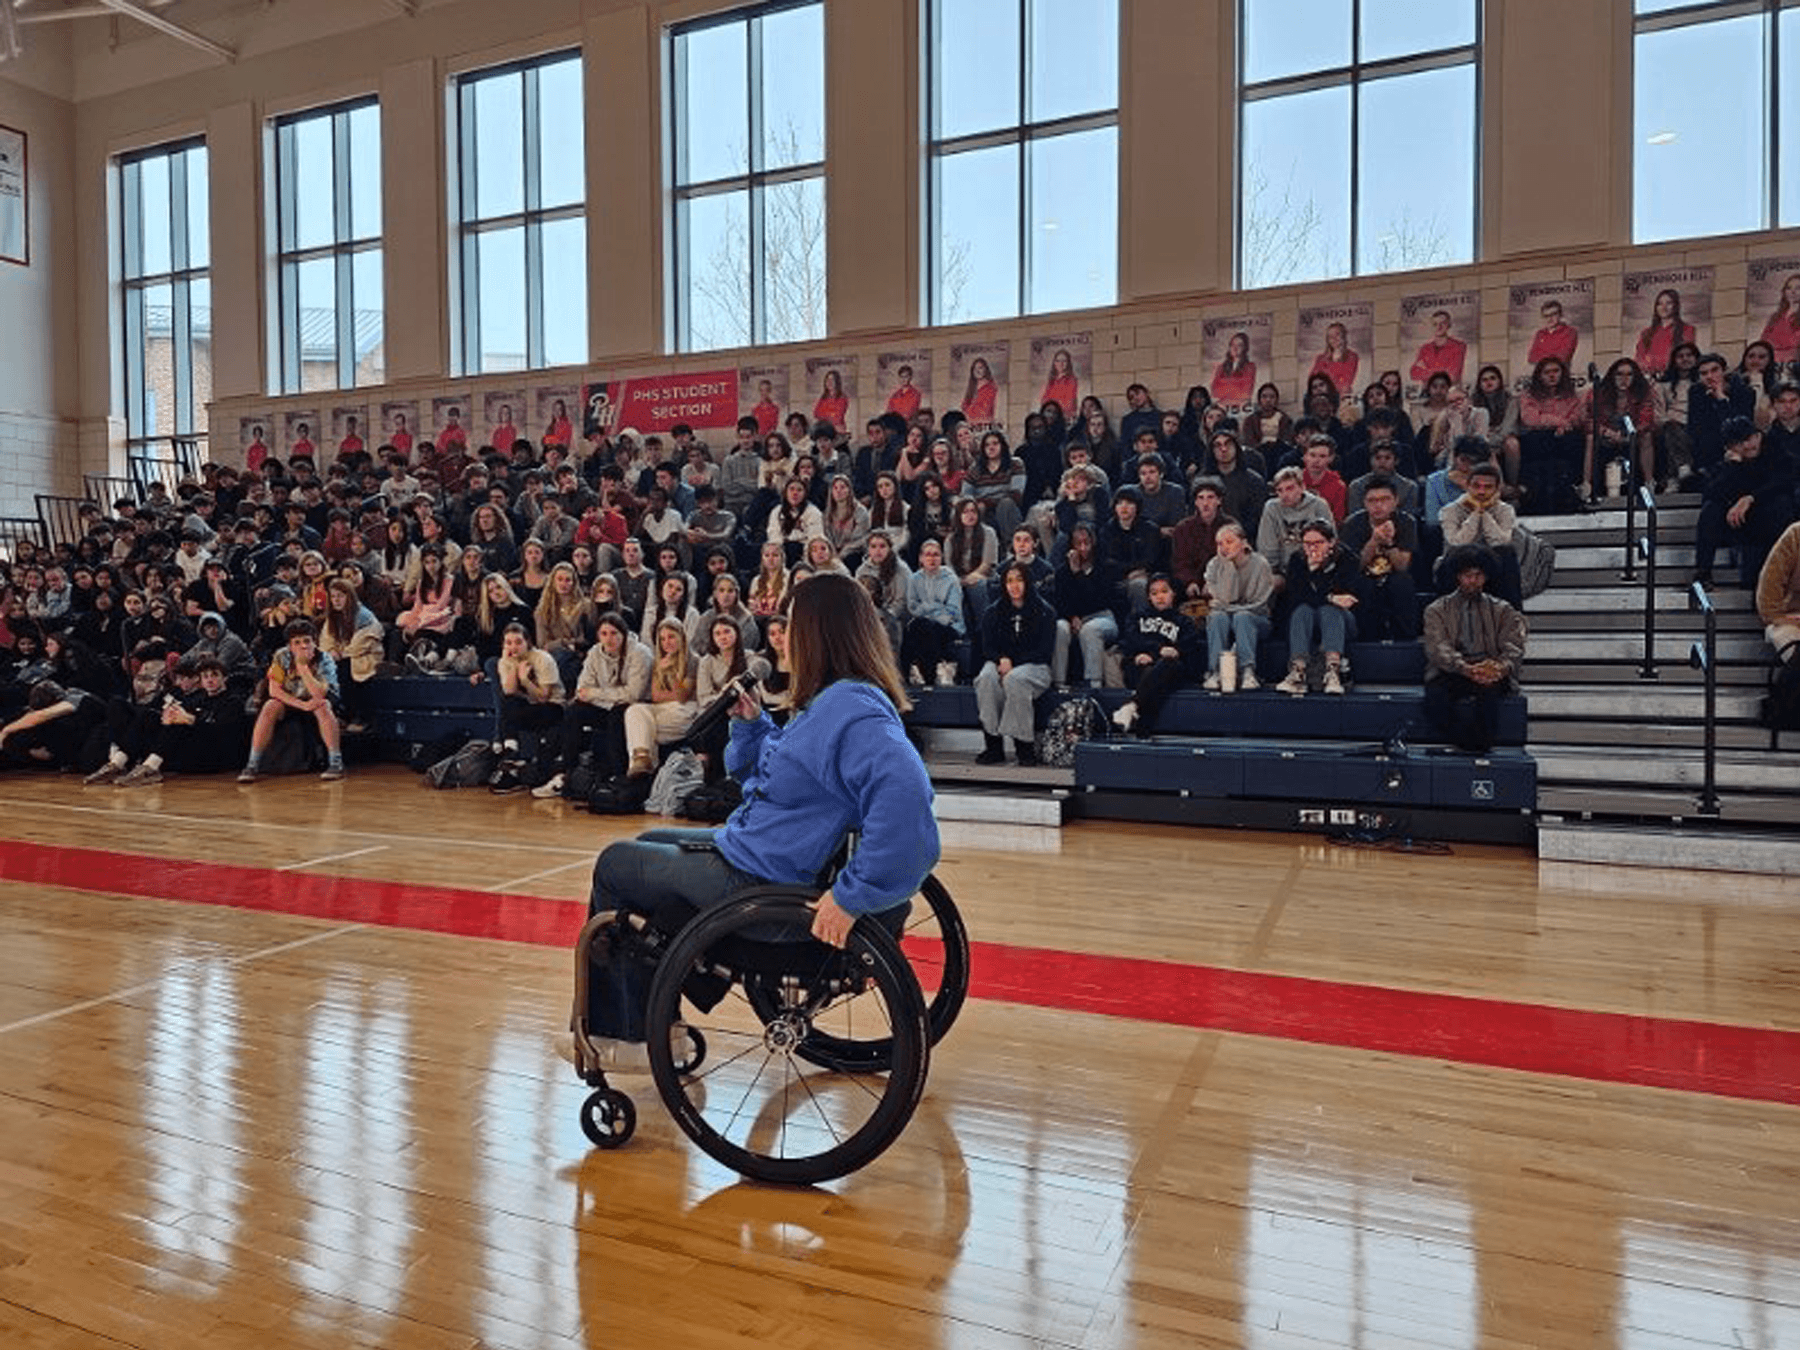 Nearly 21,000 students hear ThinkFirst of Greater Kansas City’s injury prevention message